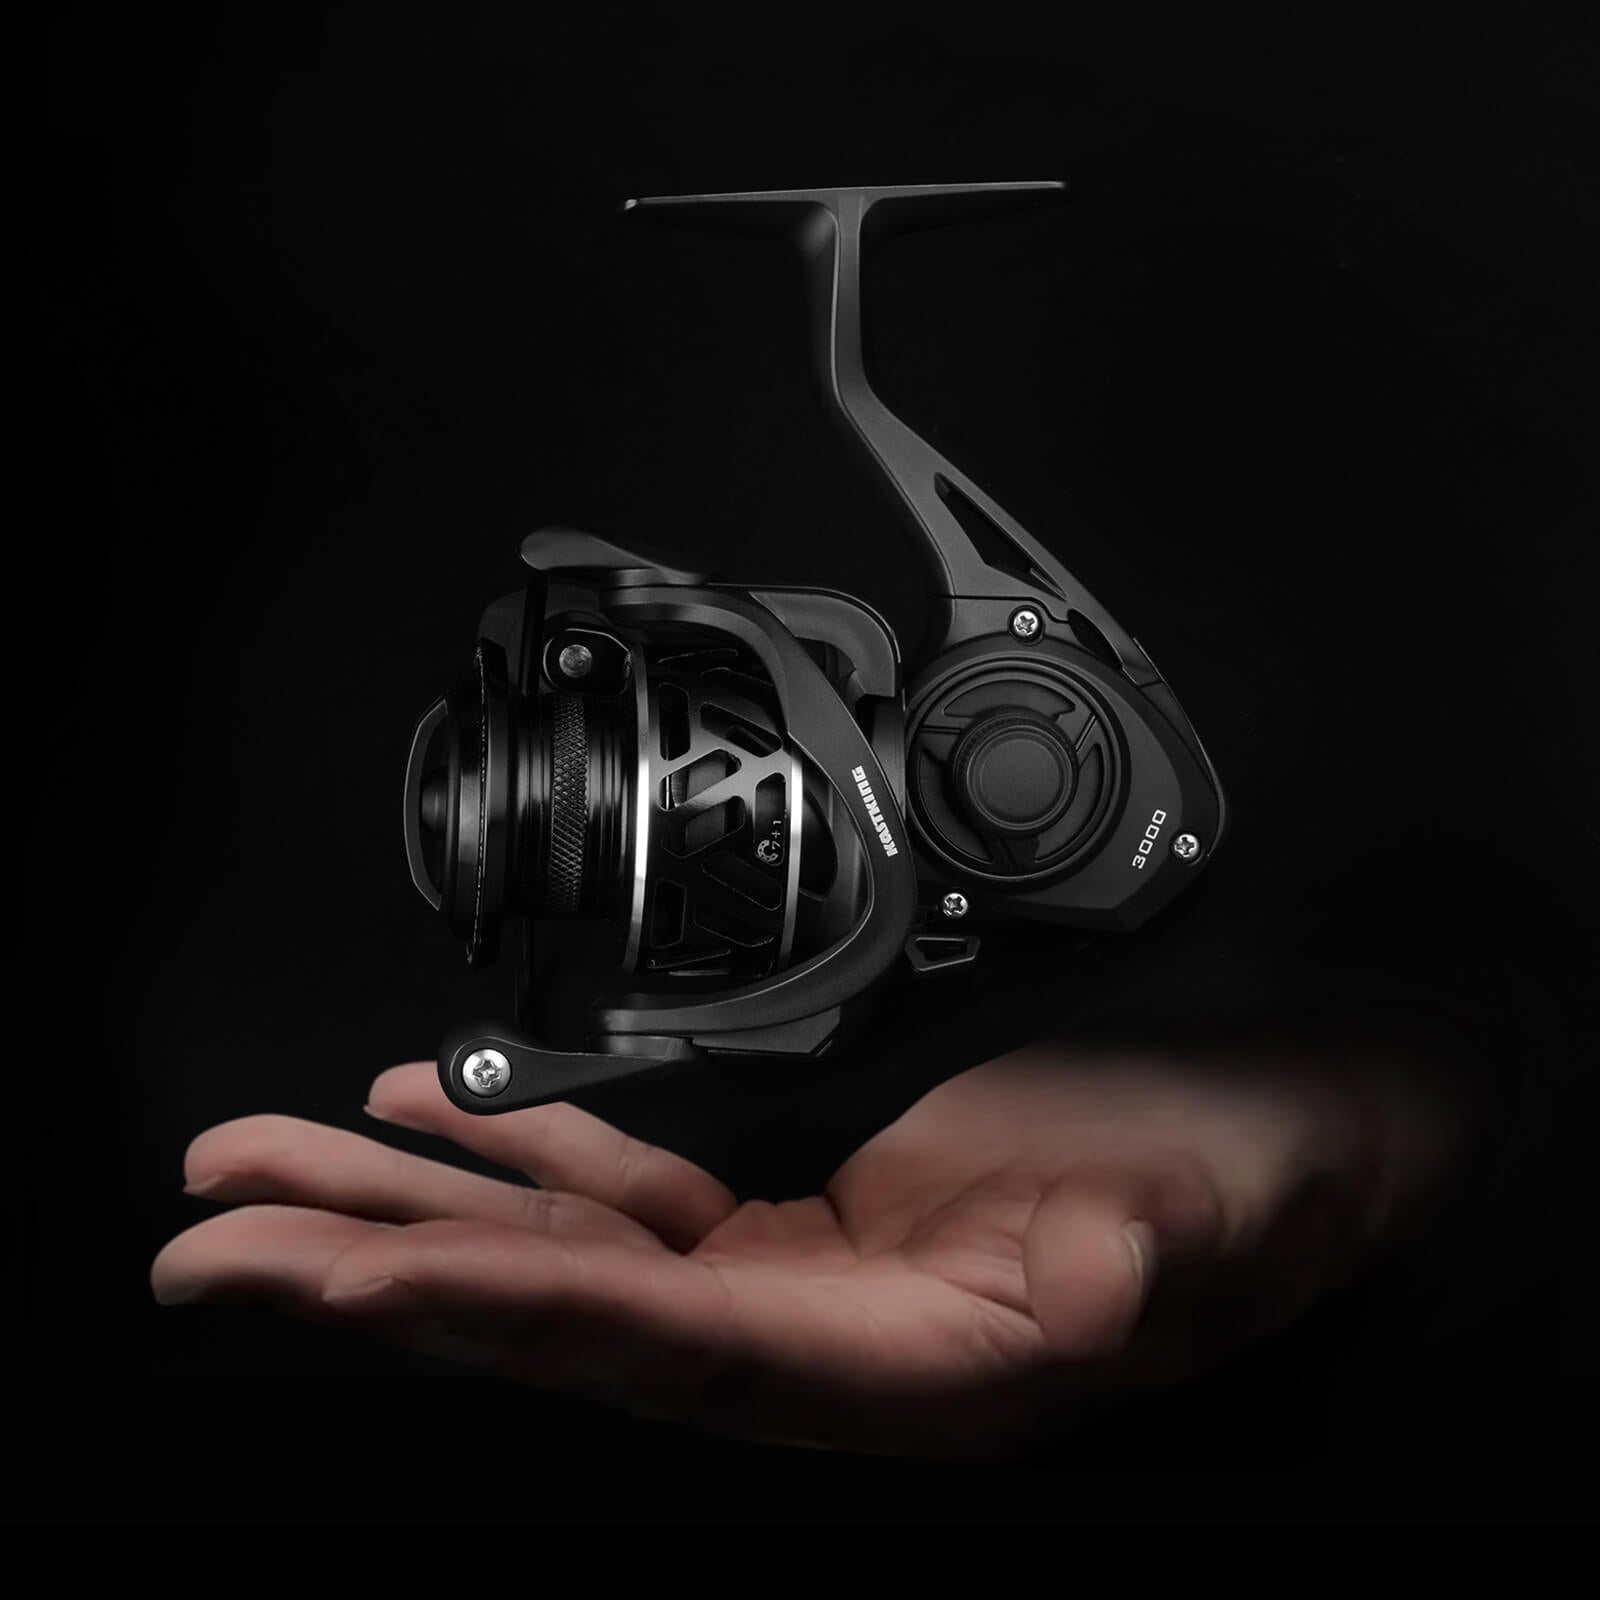 KASTKING ZEPHYR THE WORLD'S MOST WANTED BFS REEL